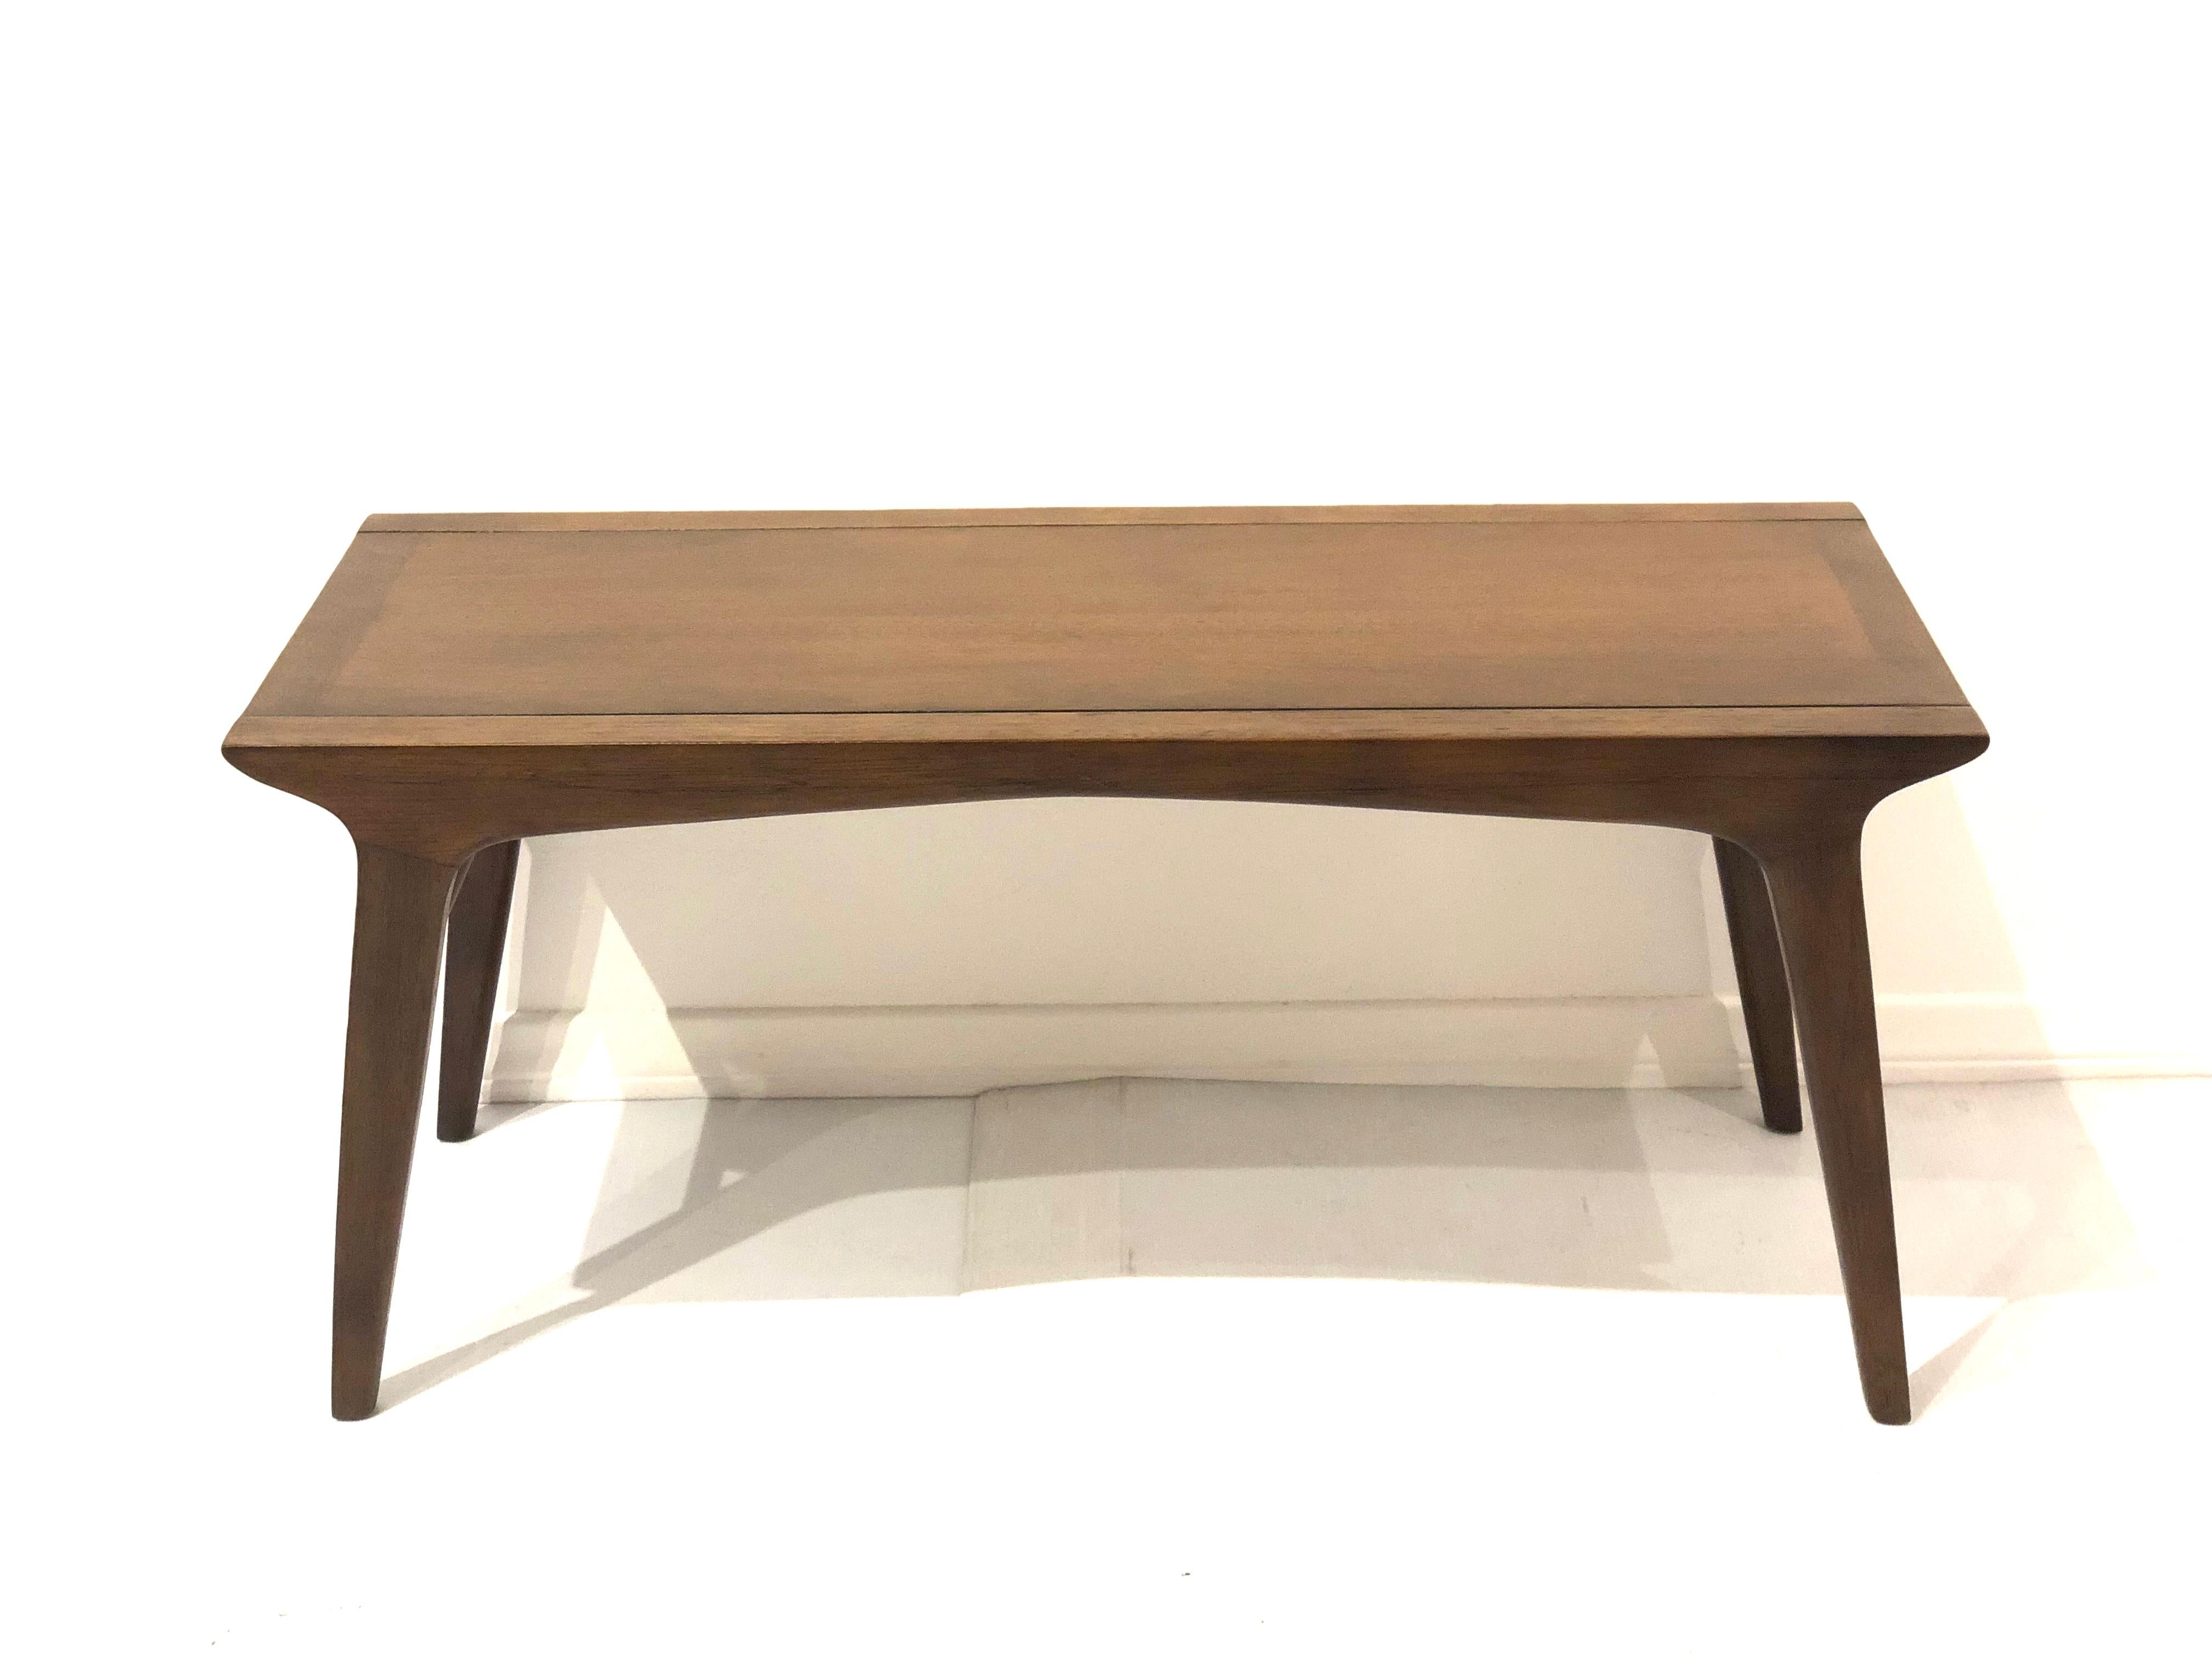 Modernist bench or table by John Van Koert for Drexel, superior quality and construction. Scaled down version of the Classic dining table, simple, elegant design. solid and sturdy freshly refinished in a walnut stain.